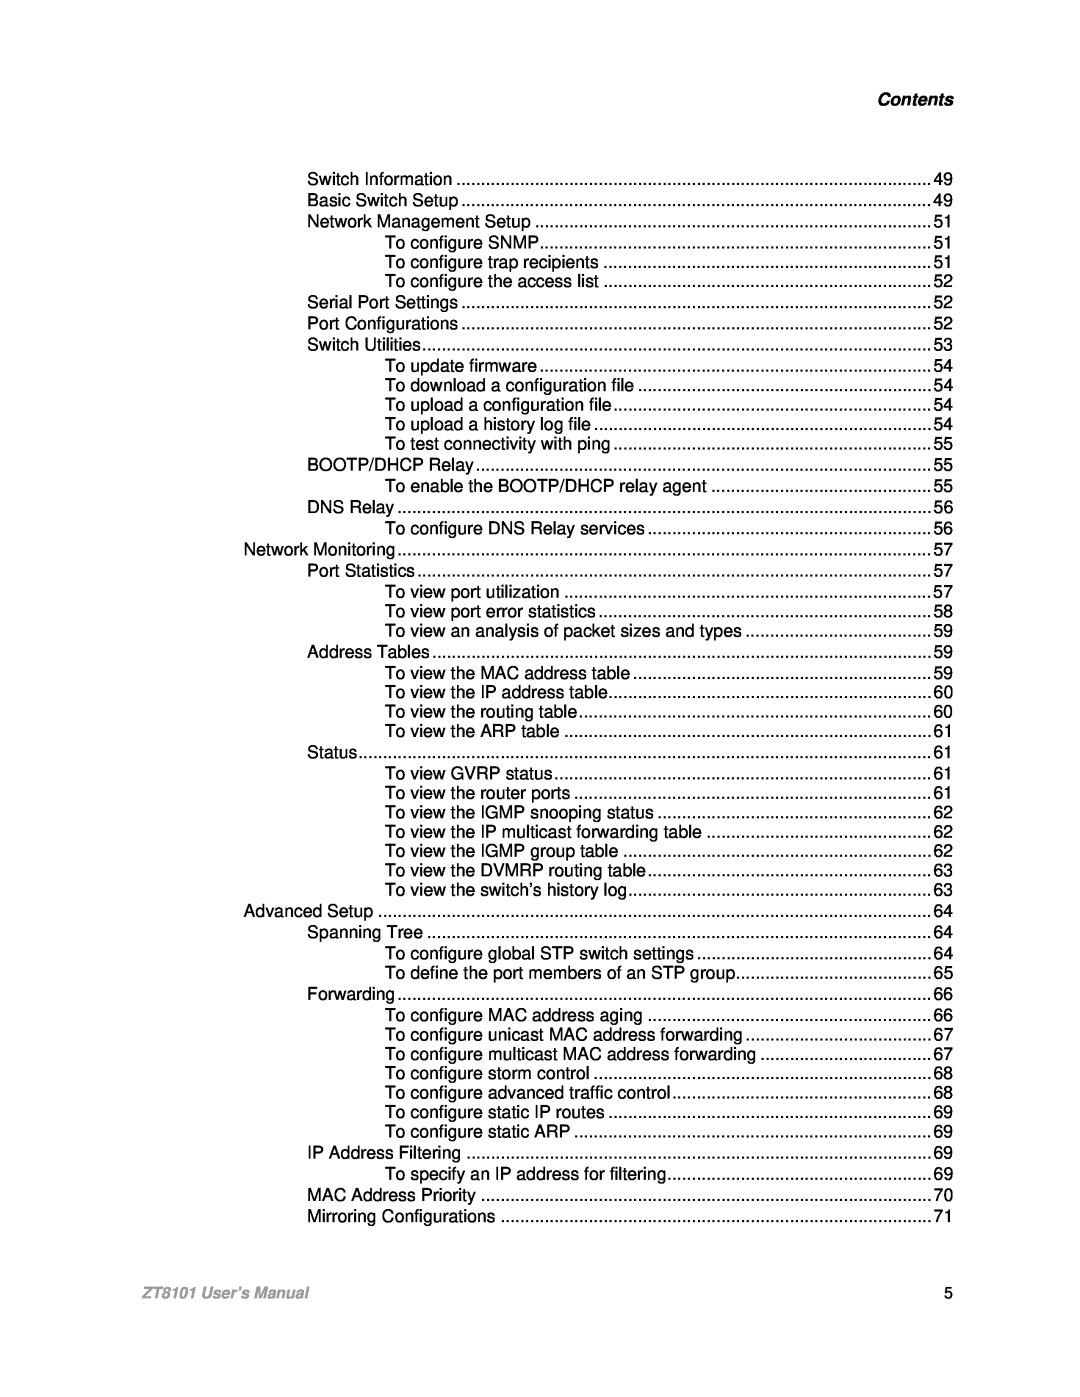 Intel ZT8101 user manual Contents, To configure SNMP 